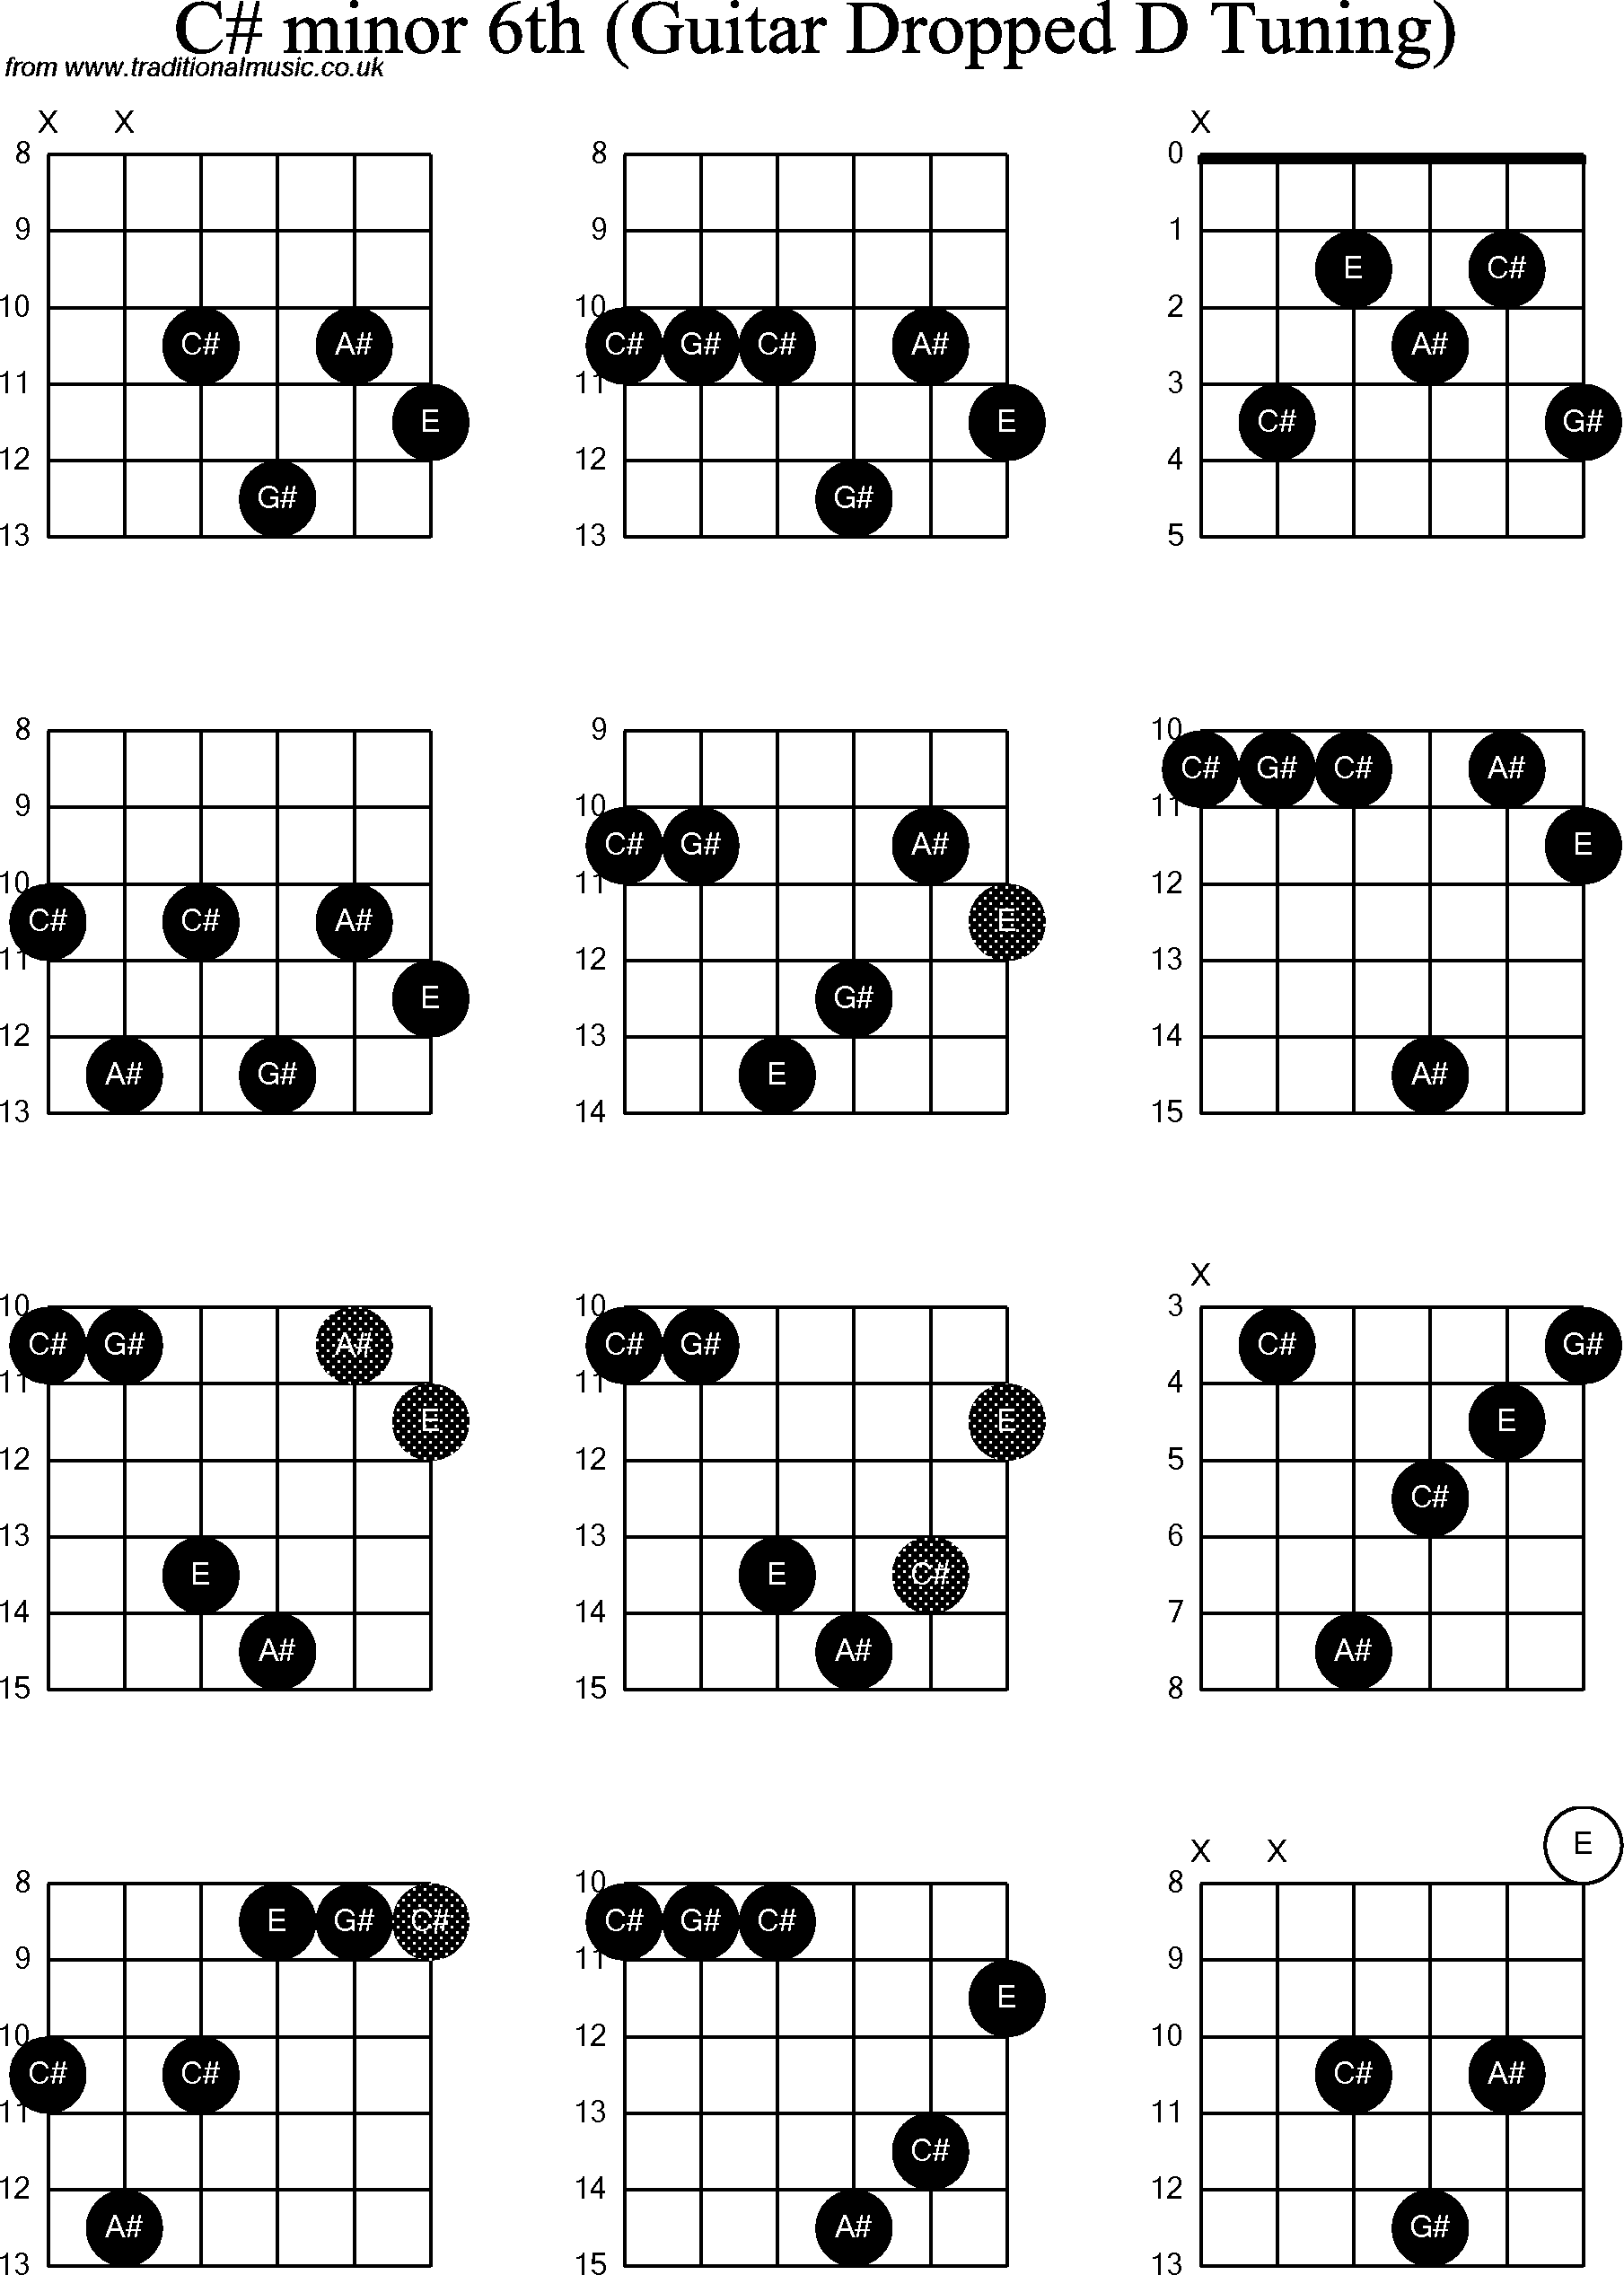 Chord Diagrams For Dropped D Guitardadgbe C Sharp Minor6th